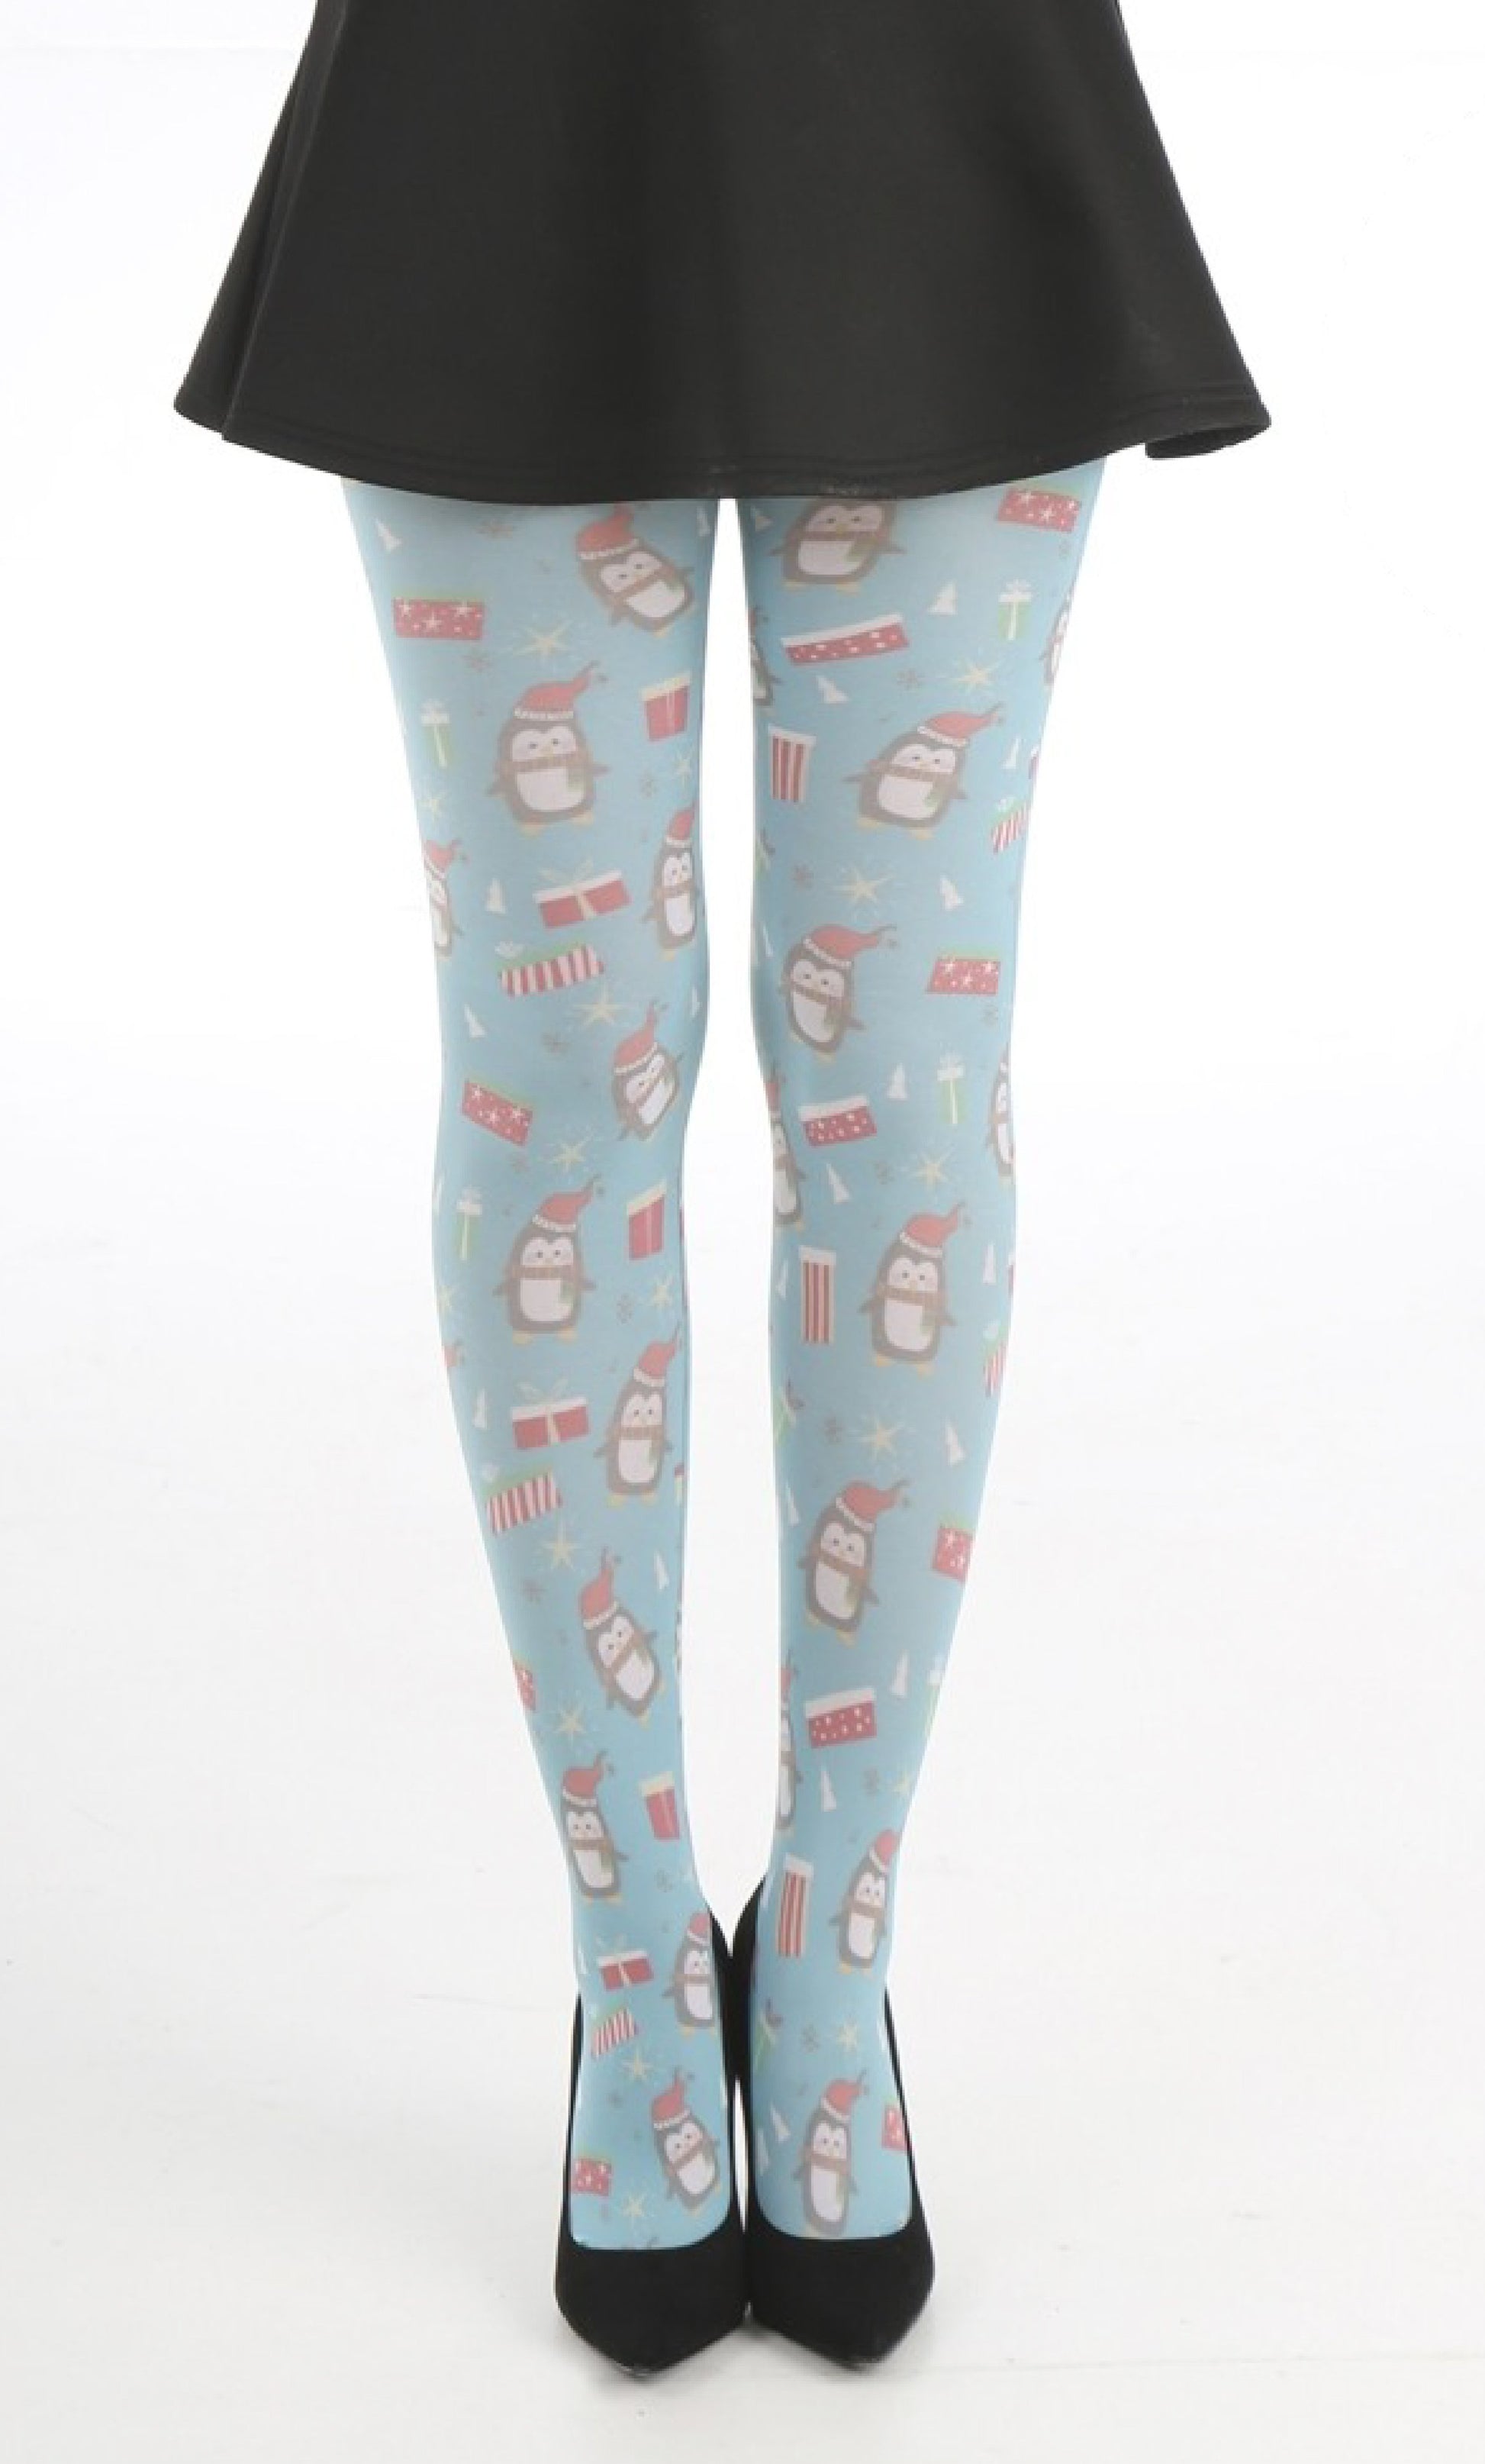 Pamela Mann Christmas Penguin Tights - Printed Christmas tights with a cute all over illustrated penguins, presents and stars print on a bright turquoise blue background.